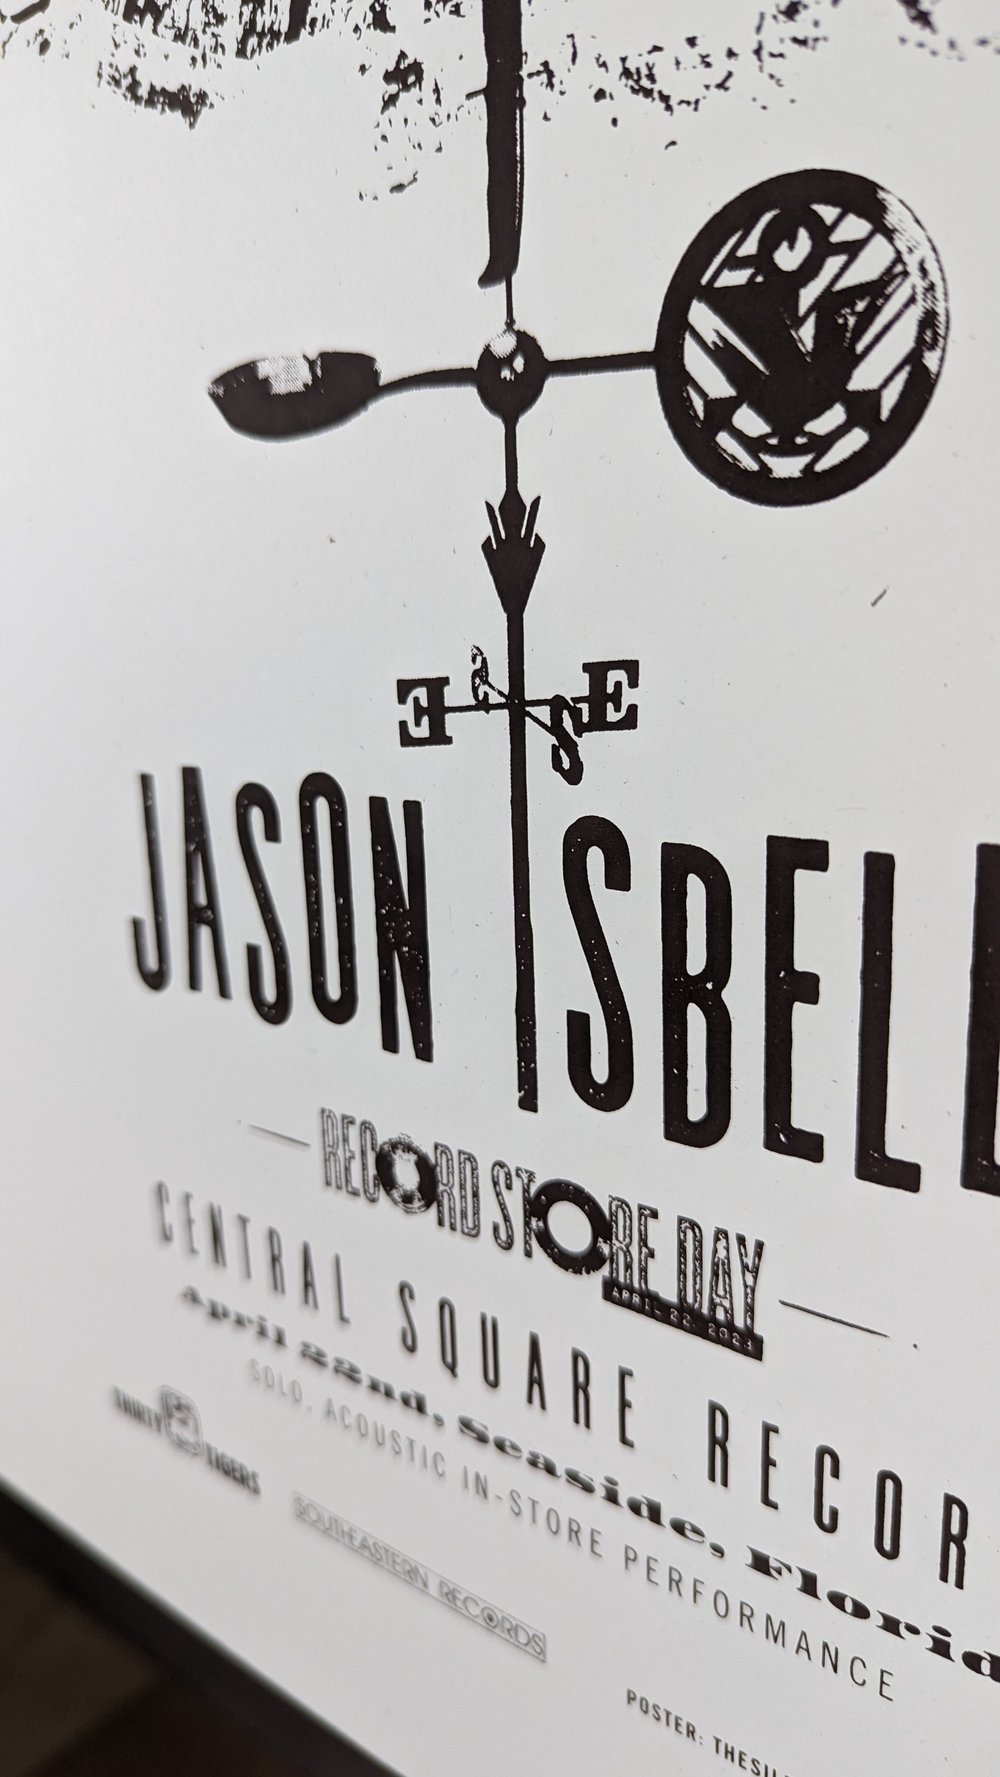 Jason Isbell, Special Record Store Day Poster